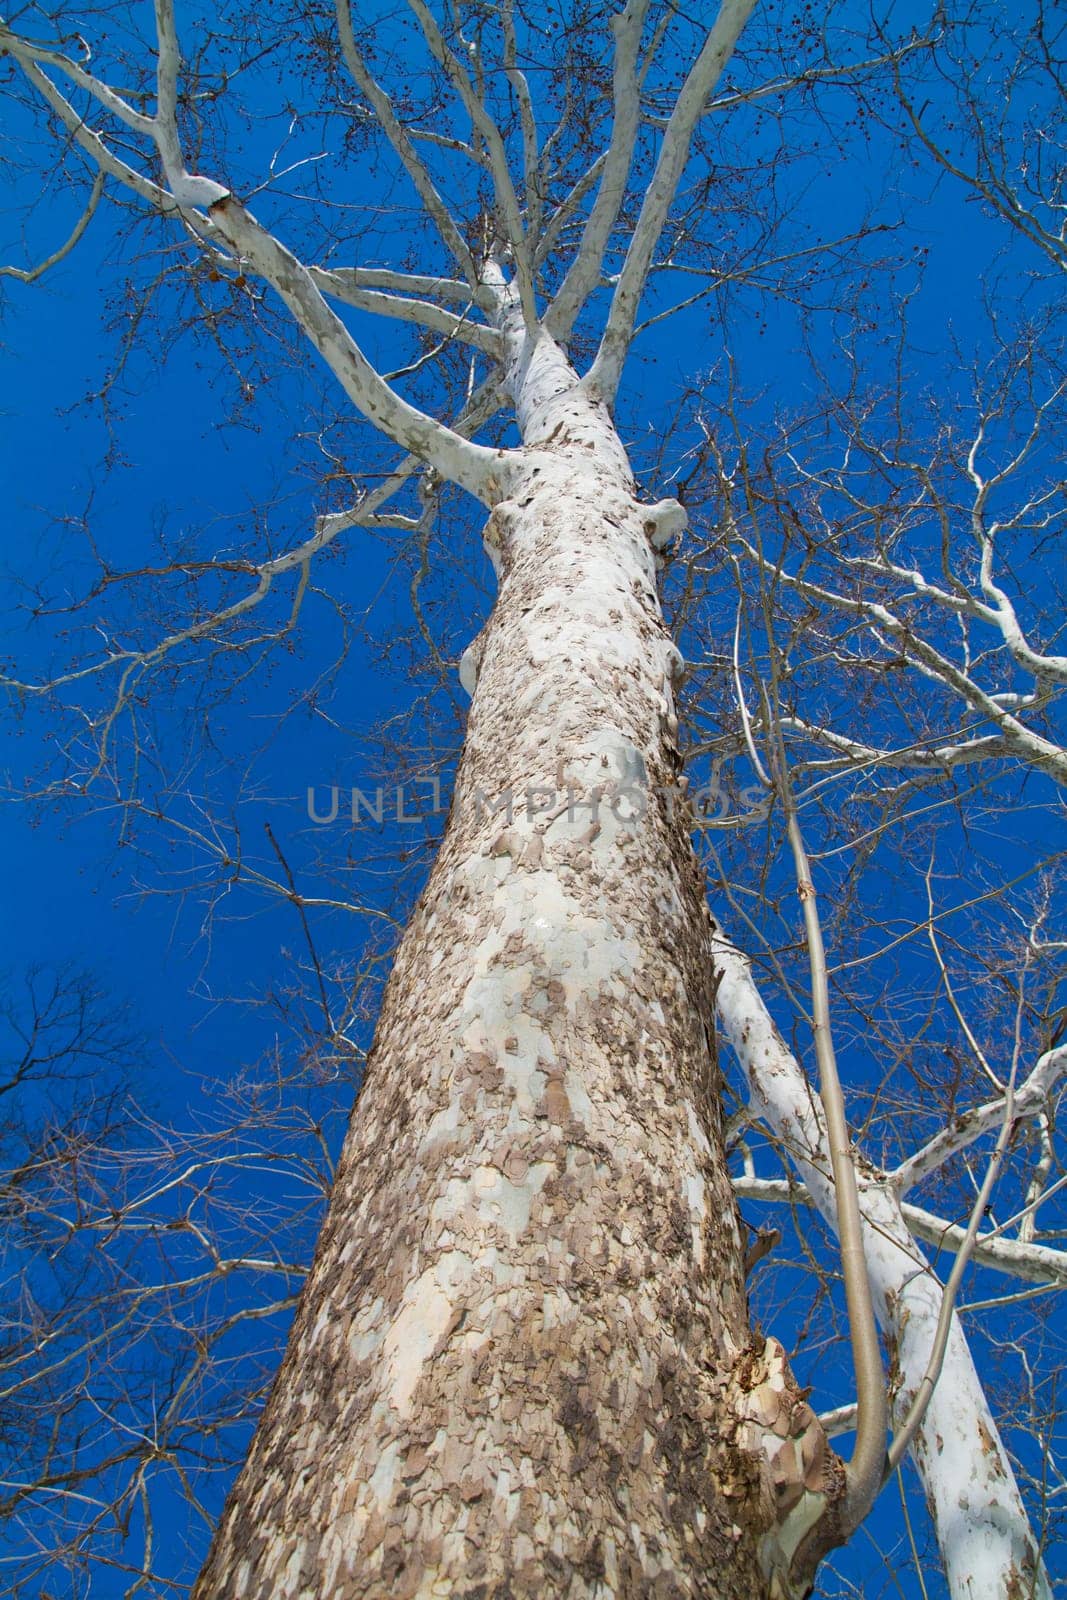 Ant's View of Majestic Leafless Tree Against Clear Blue Sky by njproductions